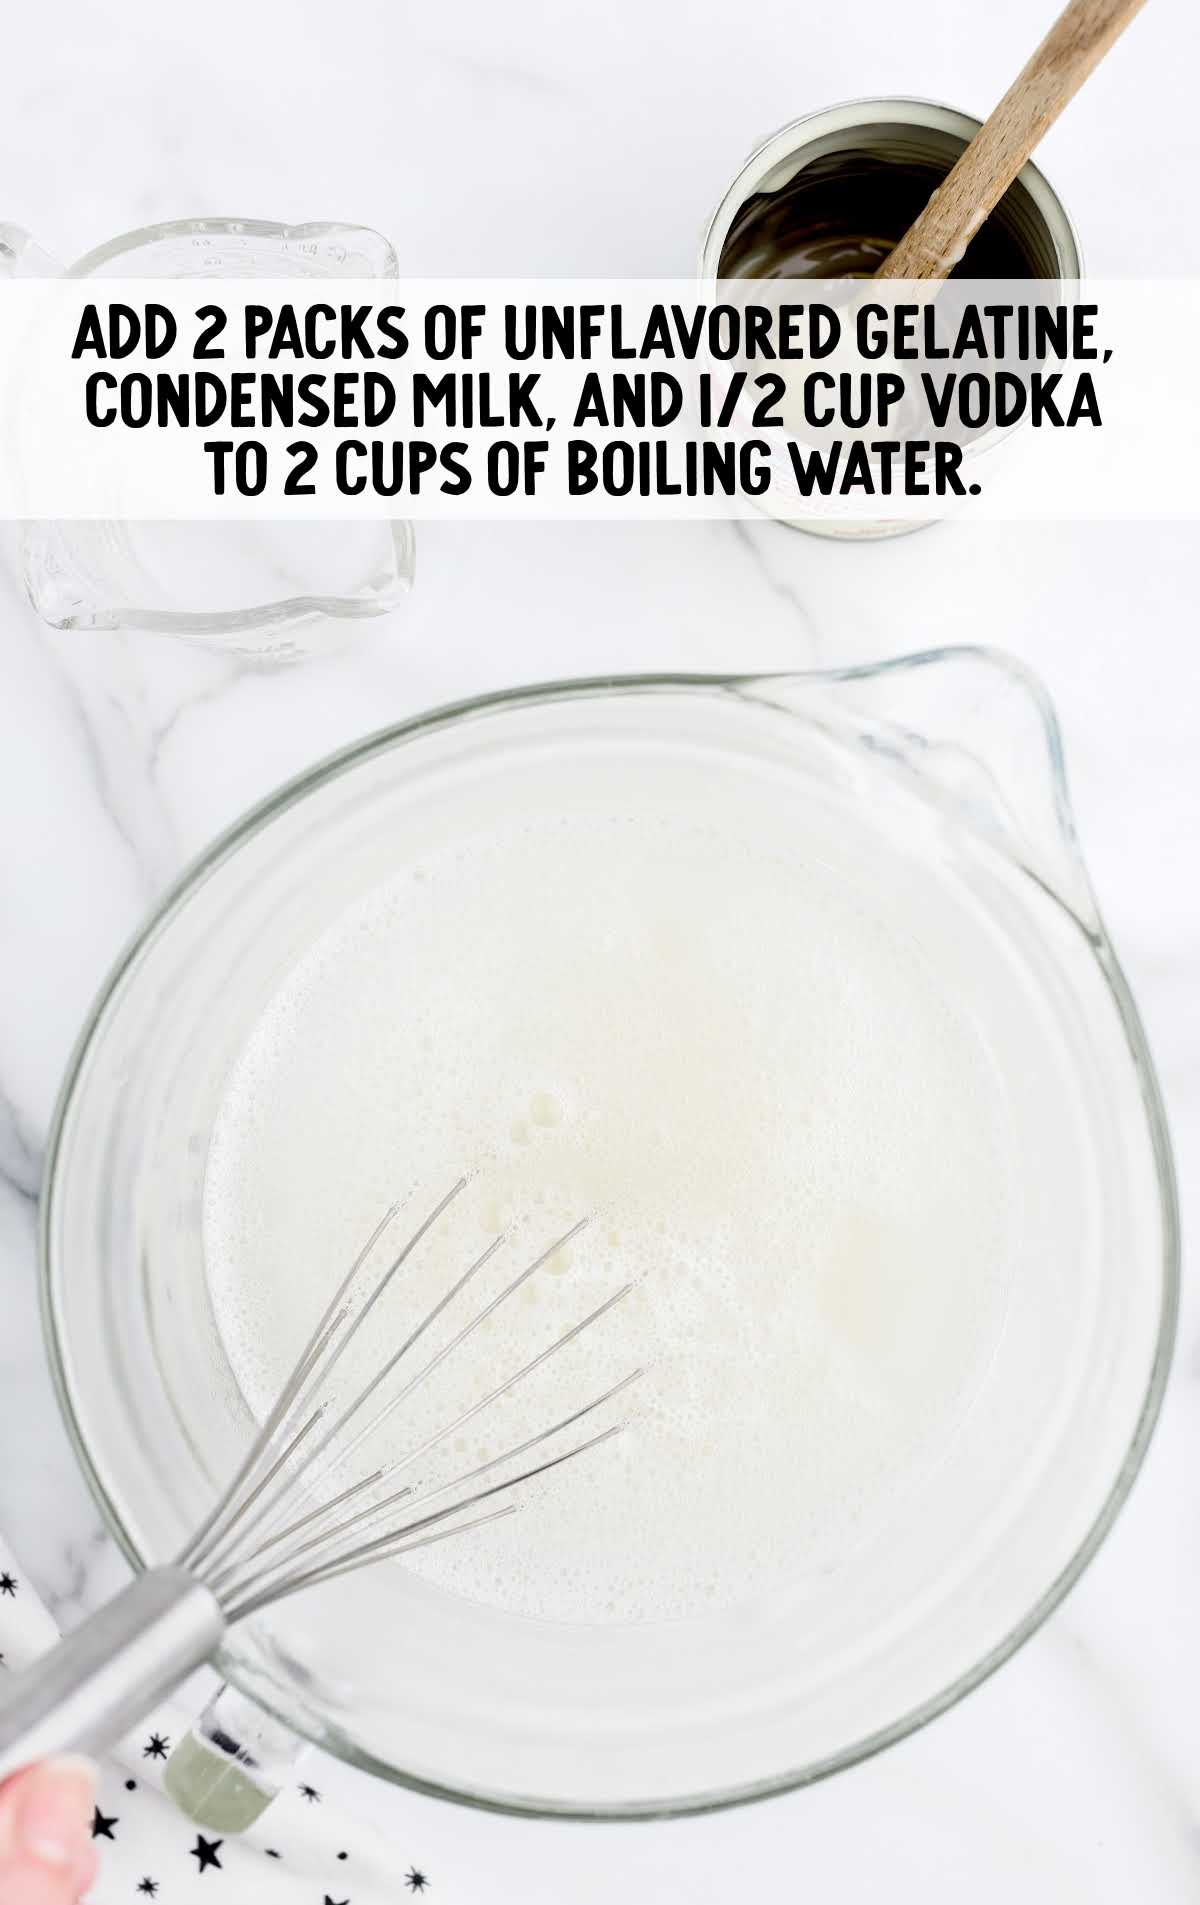 unflavored gelatin, milk, and vodka and water whisked in a measuring cup